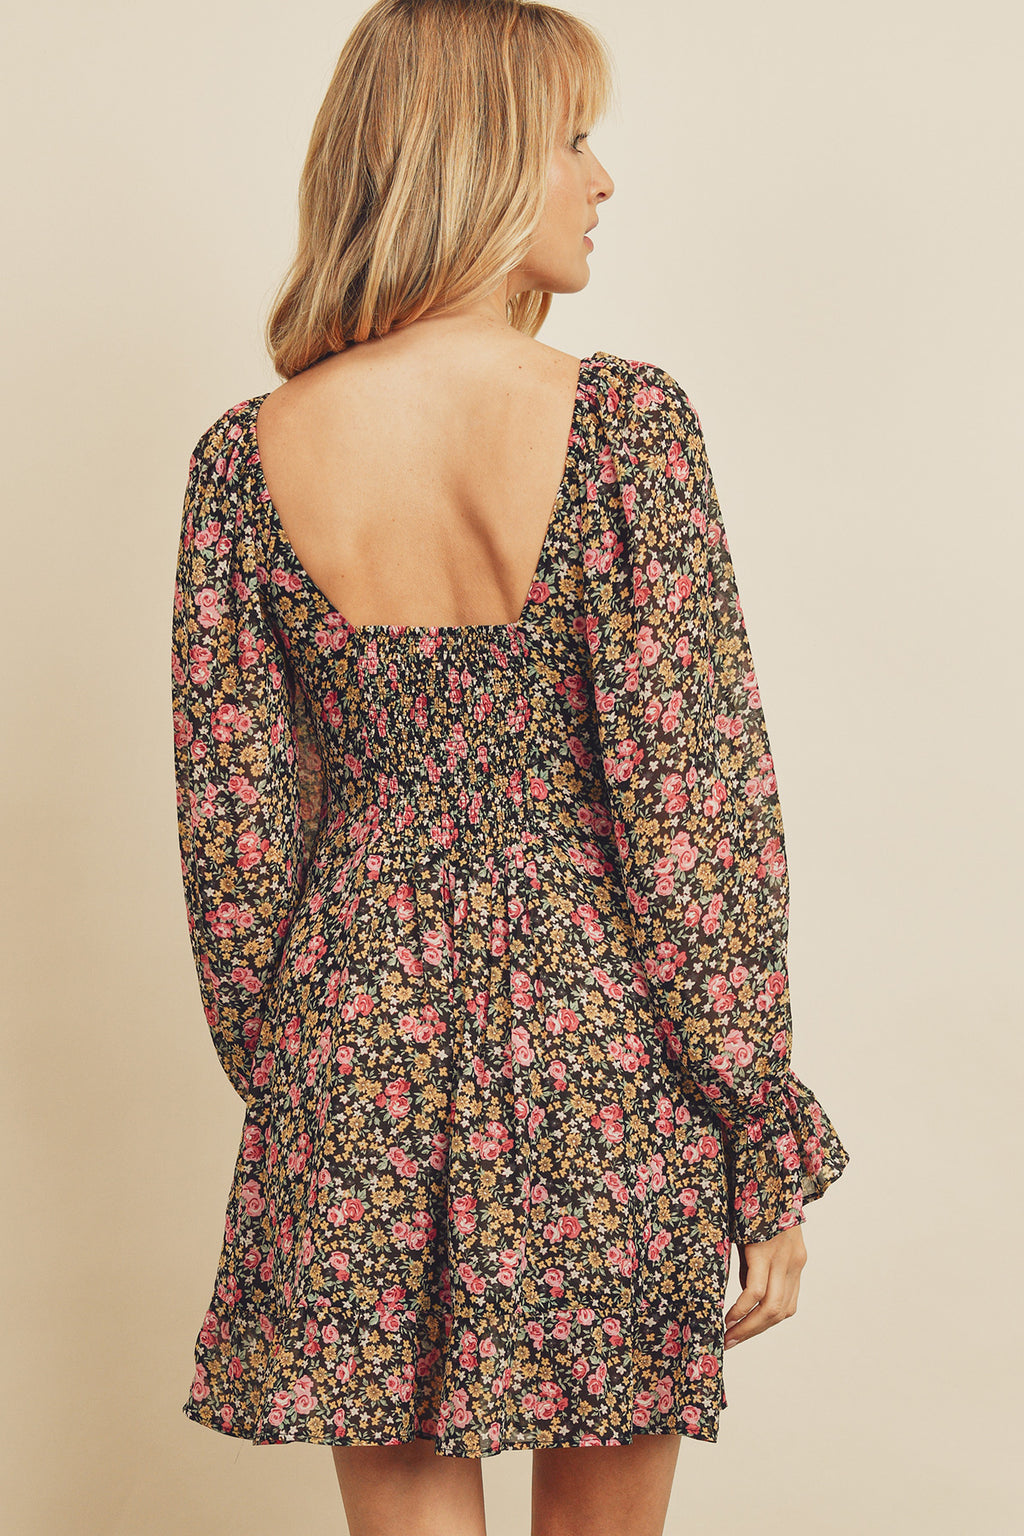 Blooming Floral, Babydoll Dress